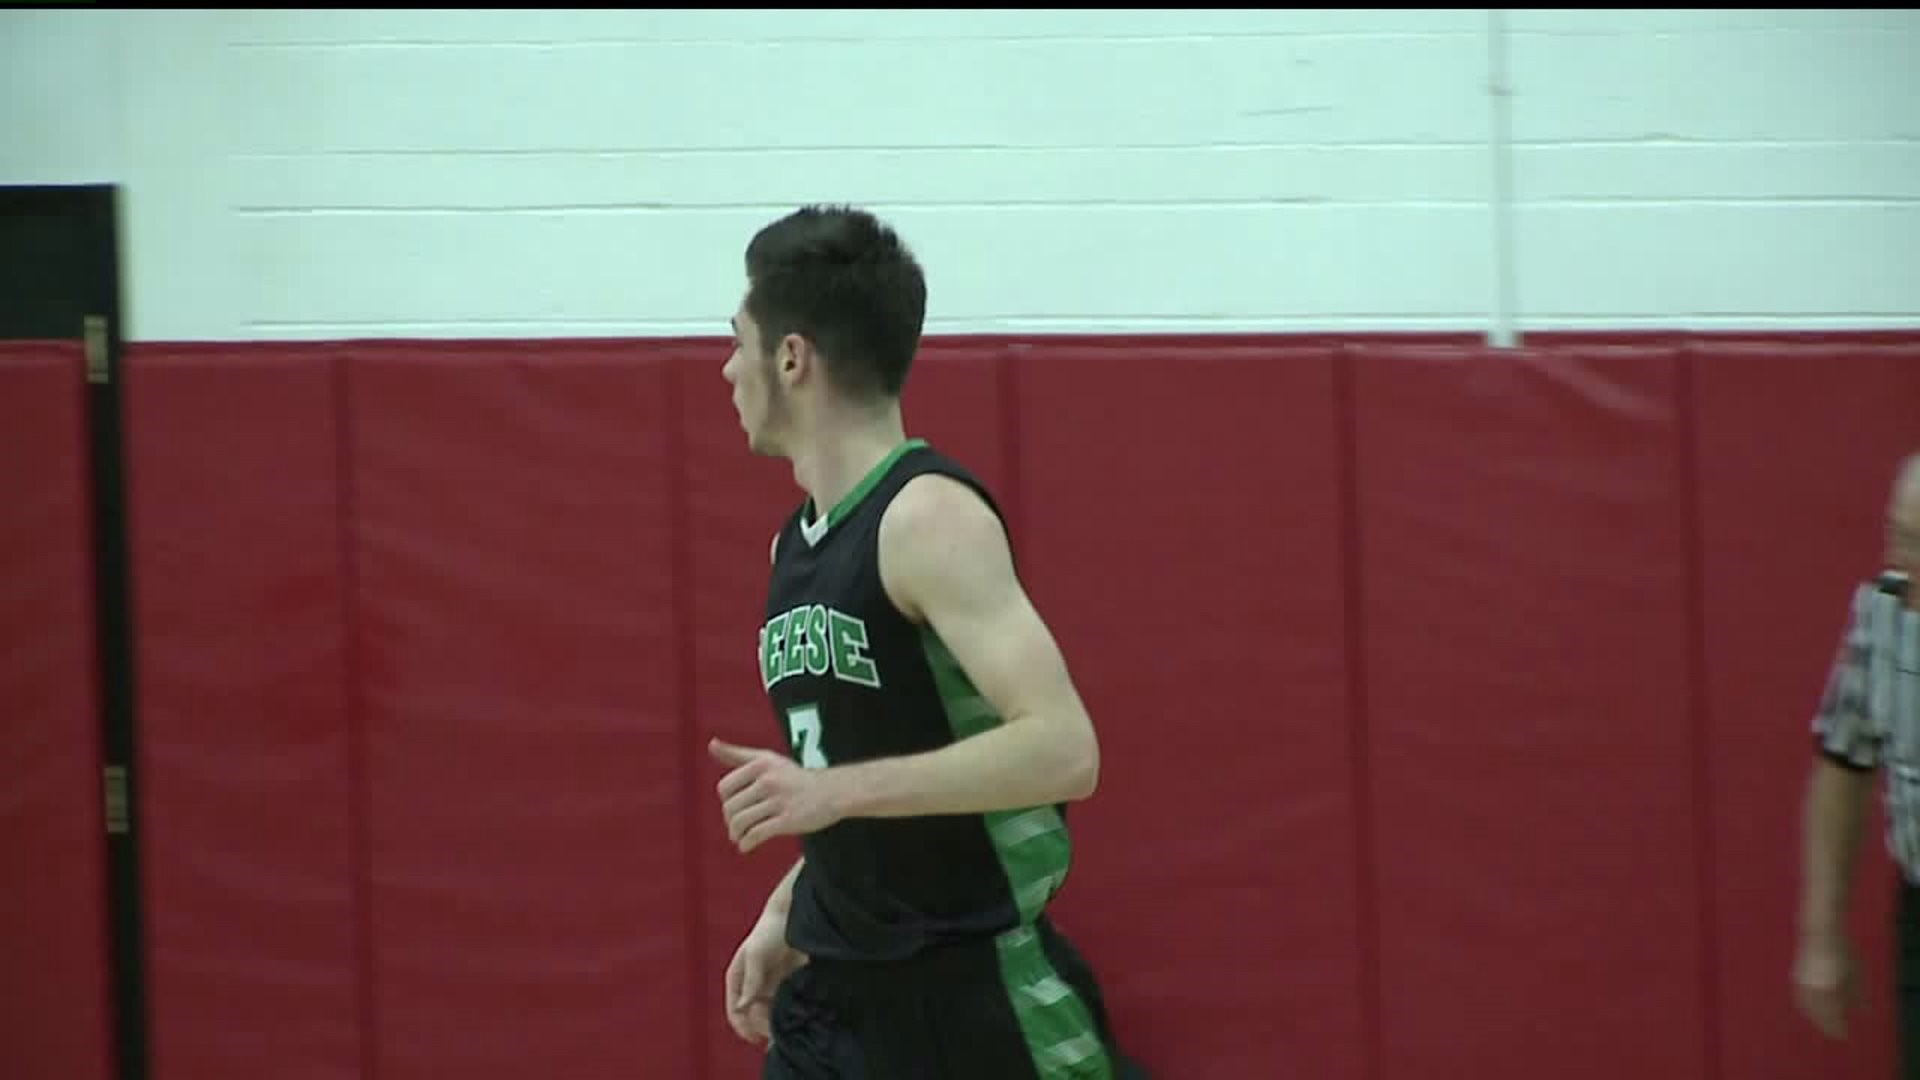 Wethersfield sees fine season come to an end